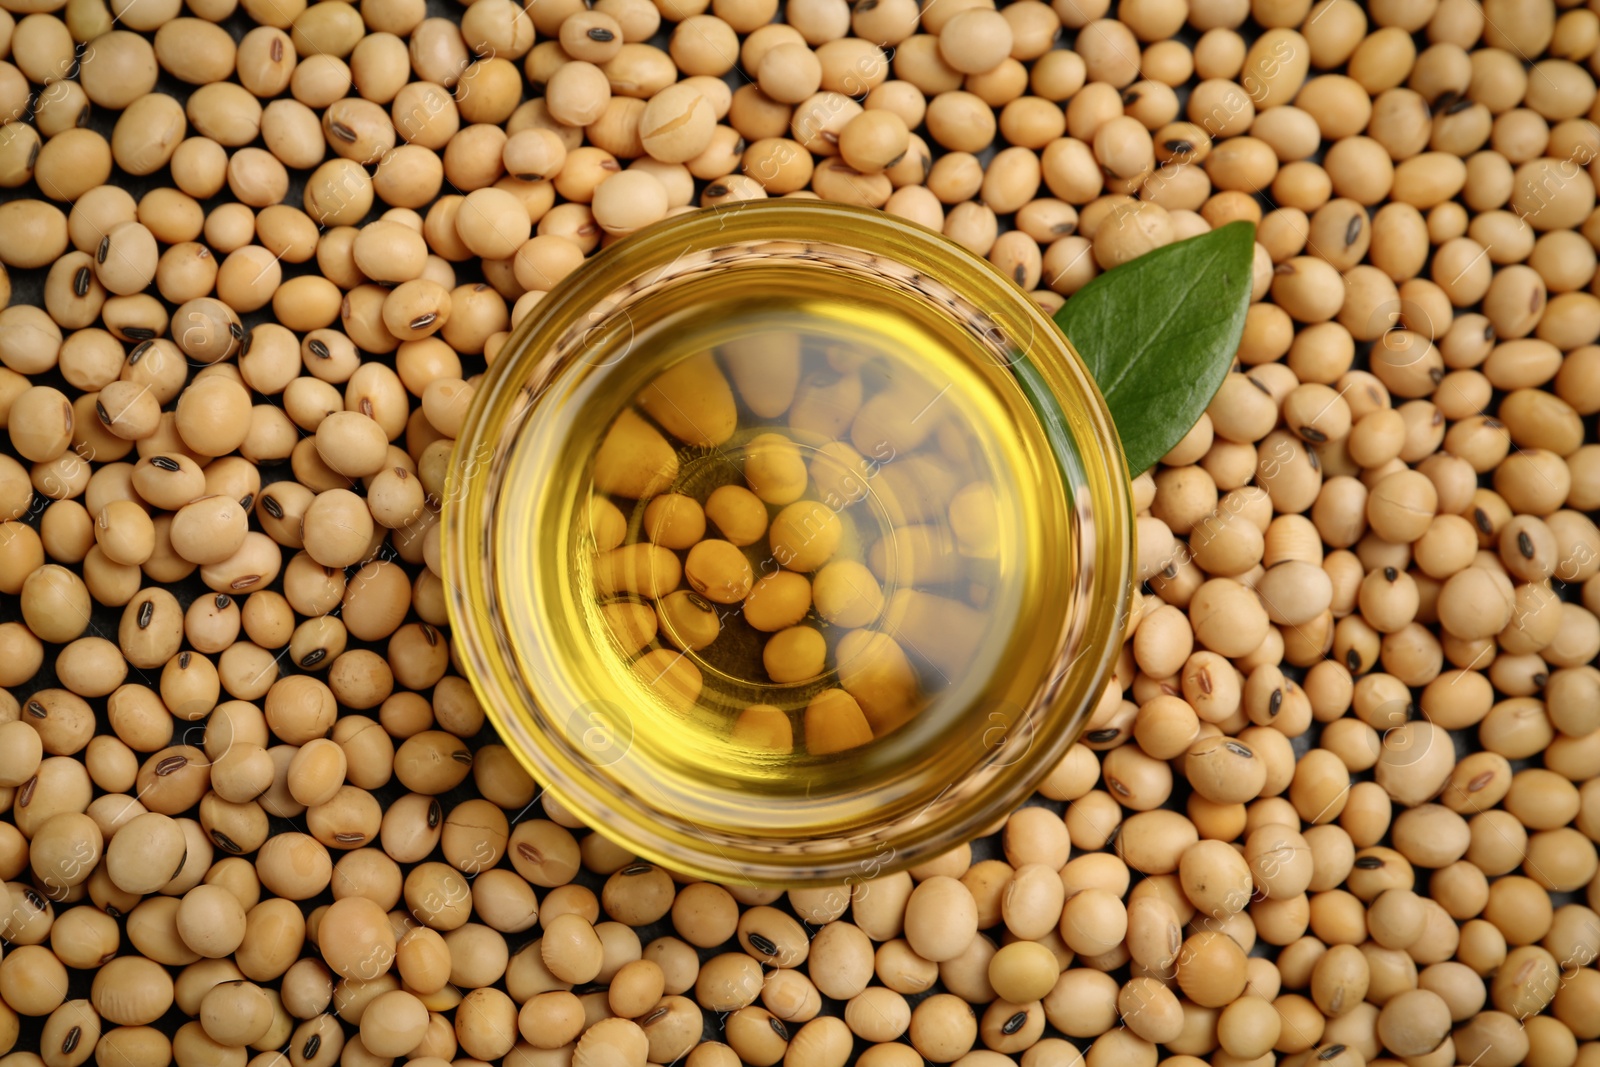 Photo of Bowl of oil and green leaf on soybeans, top view